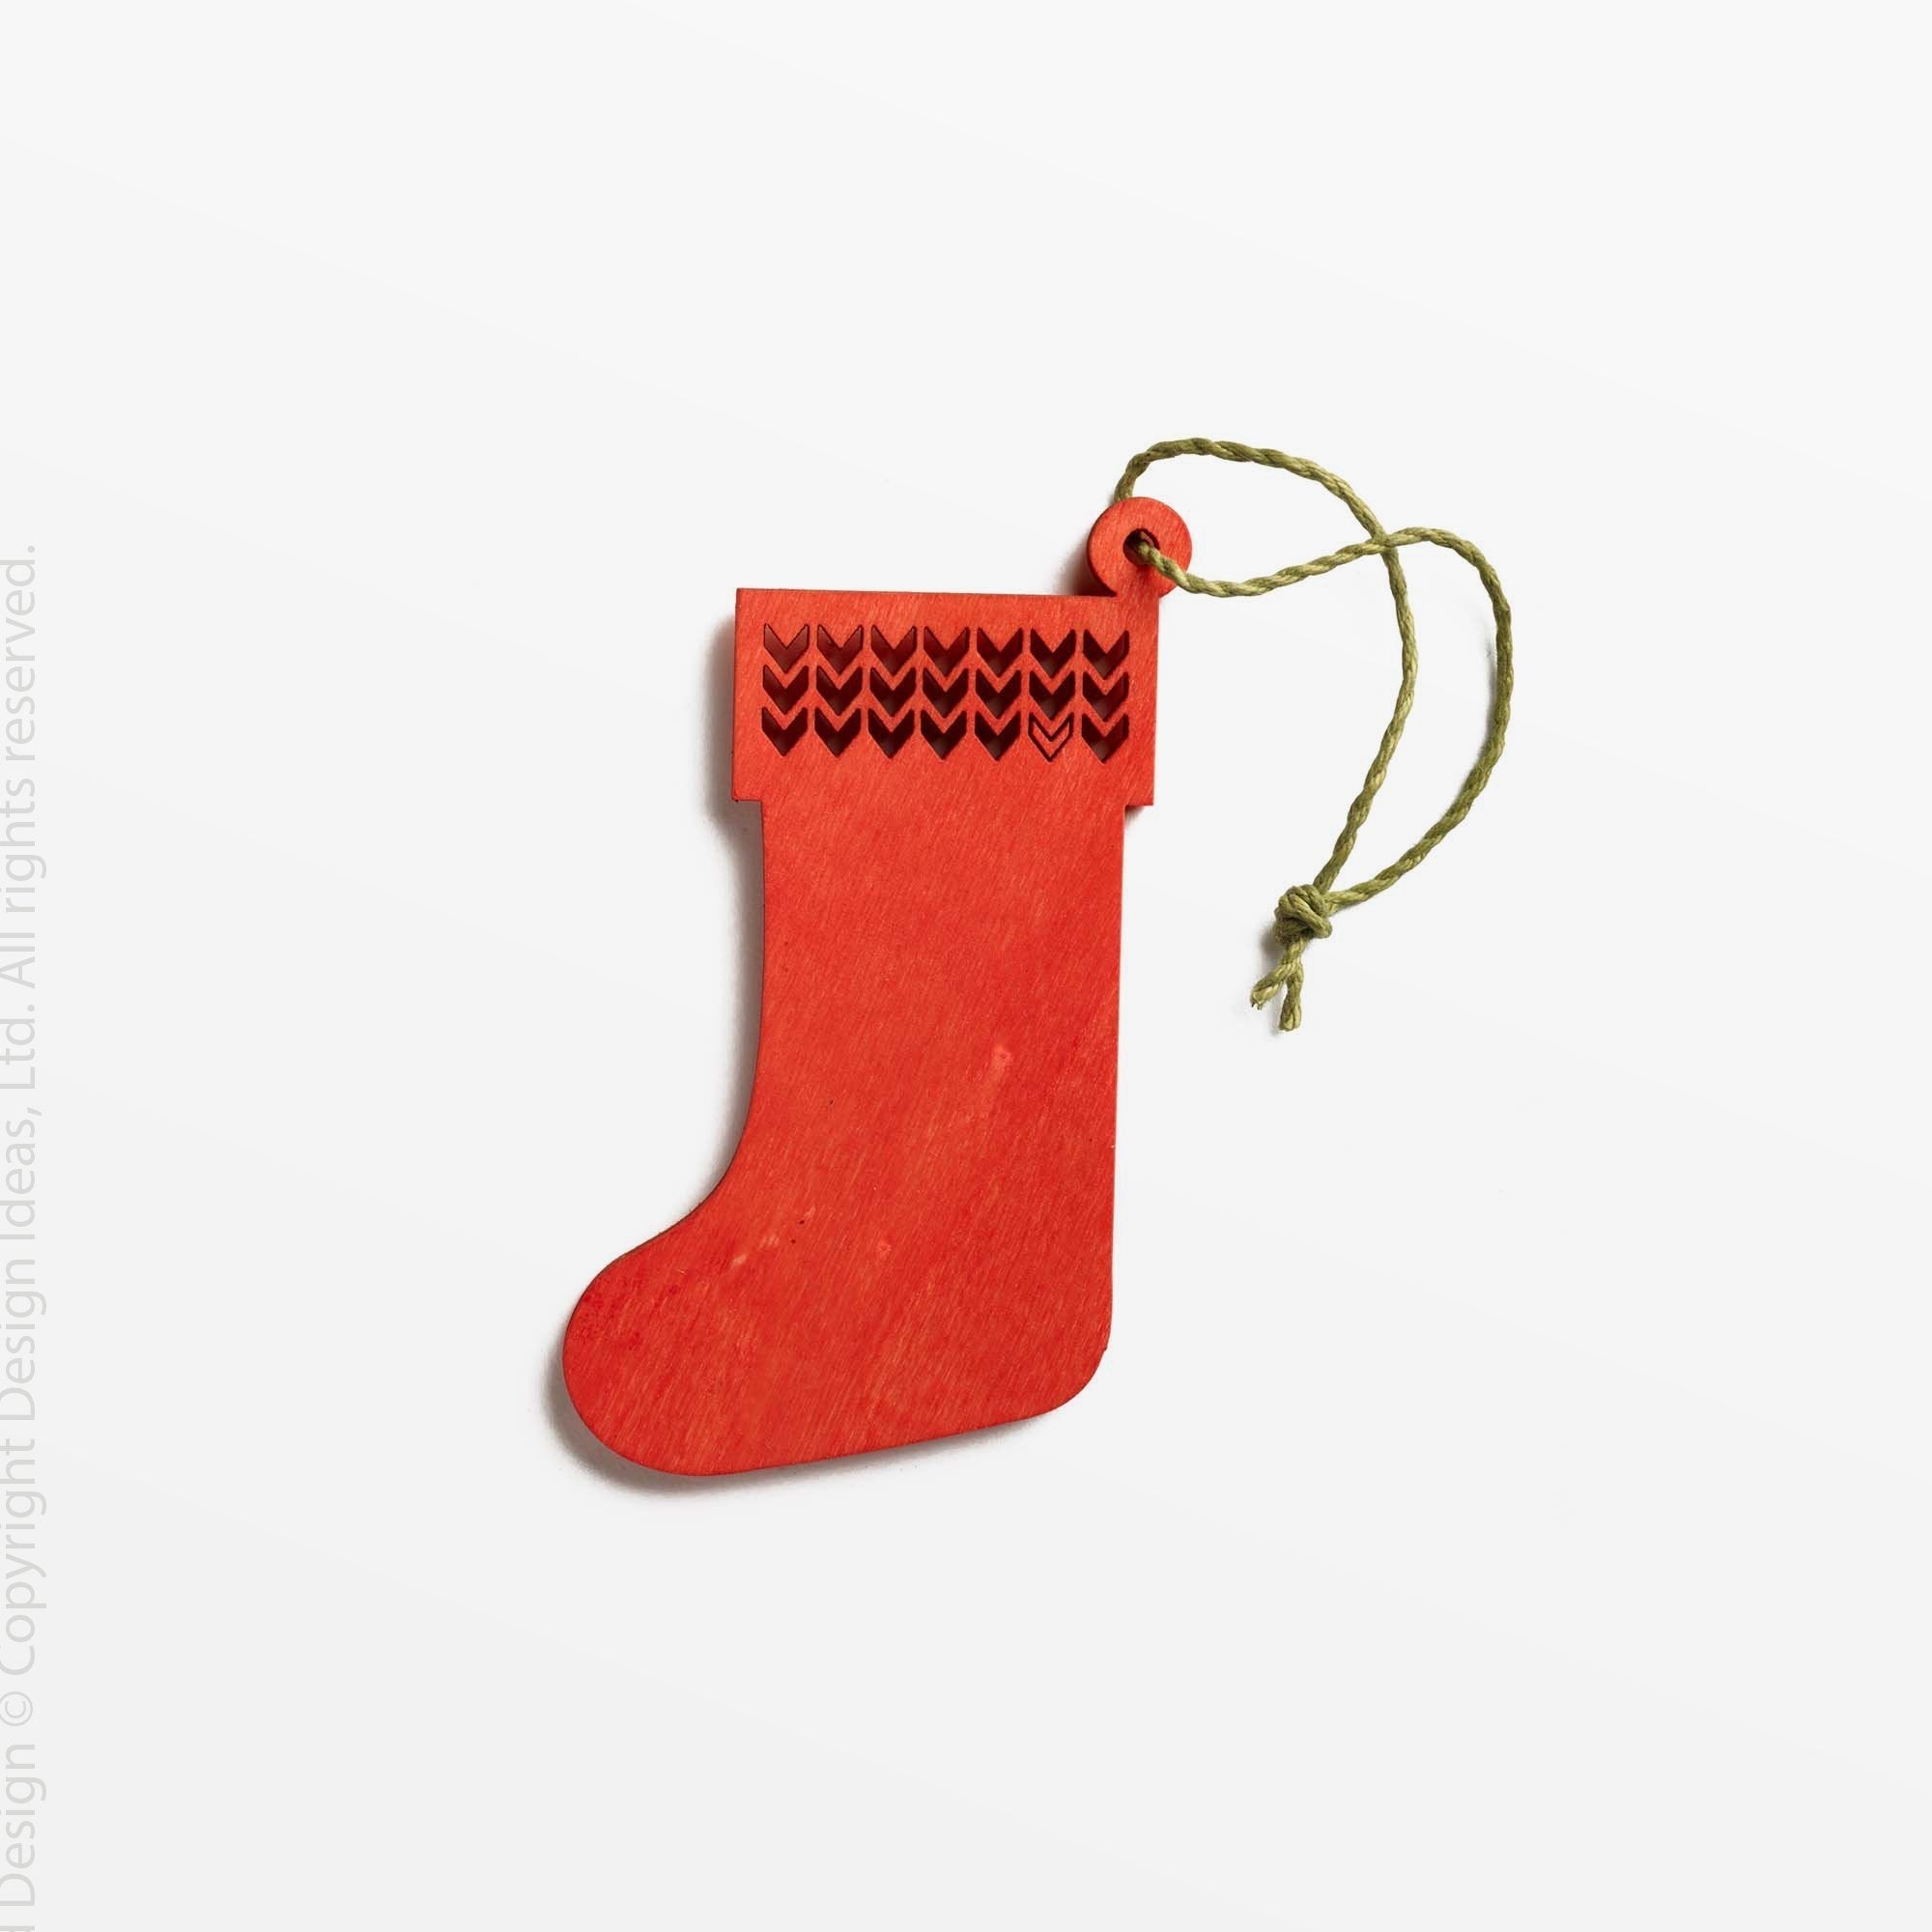 Festive Stocking Wood Ornament - white color | Image 1 | From the Festive Collection | Elegantly assembled with natural wood for long lasting use | Available in white color | texxture home